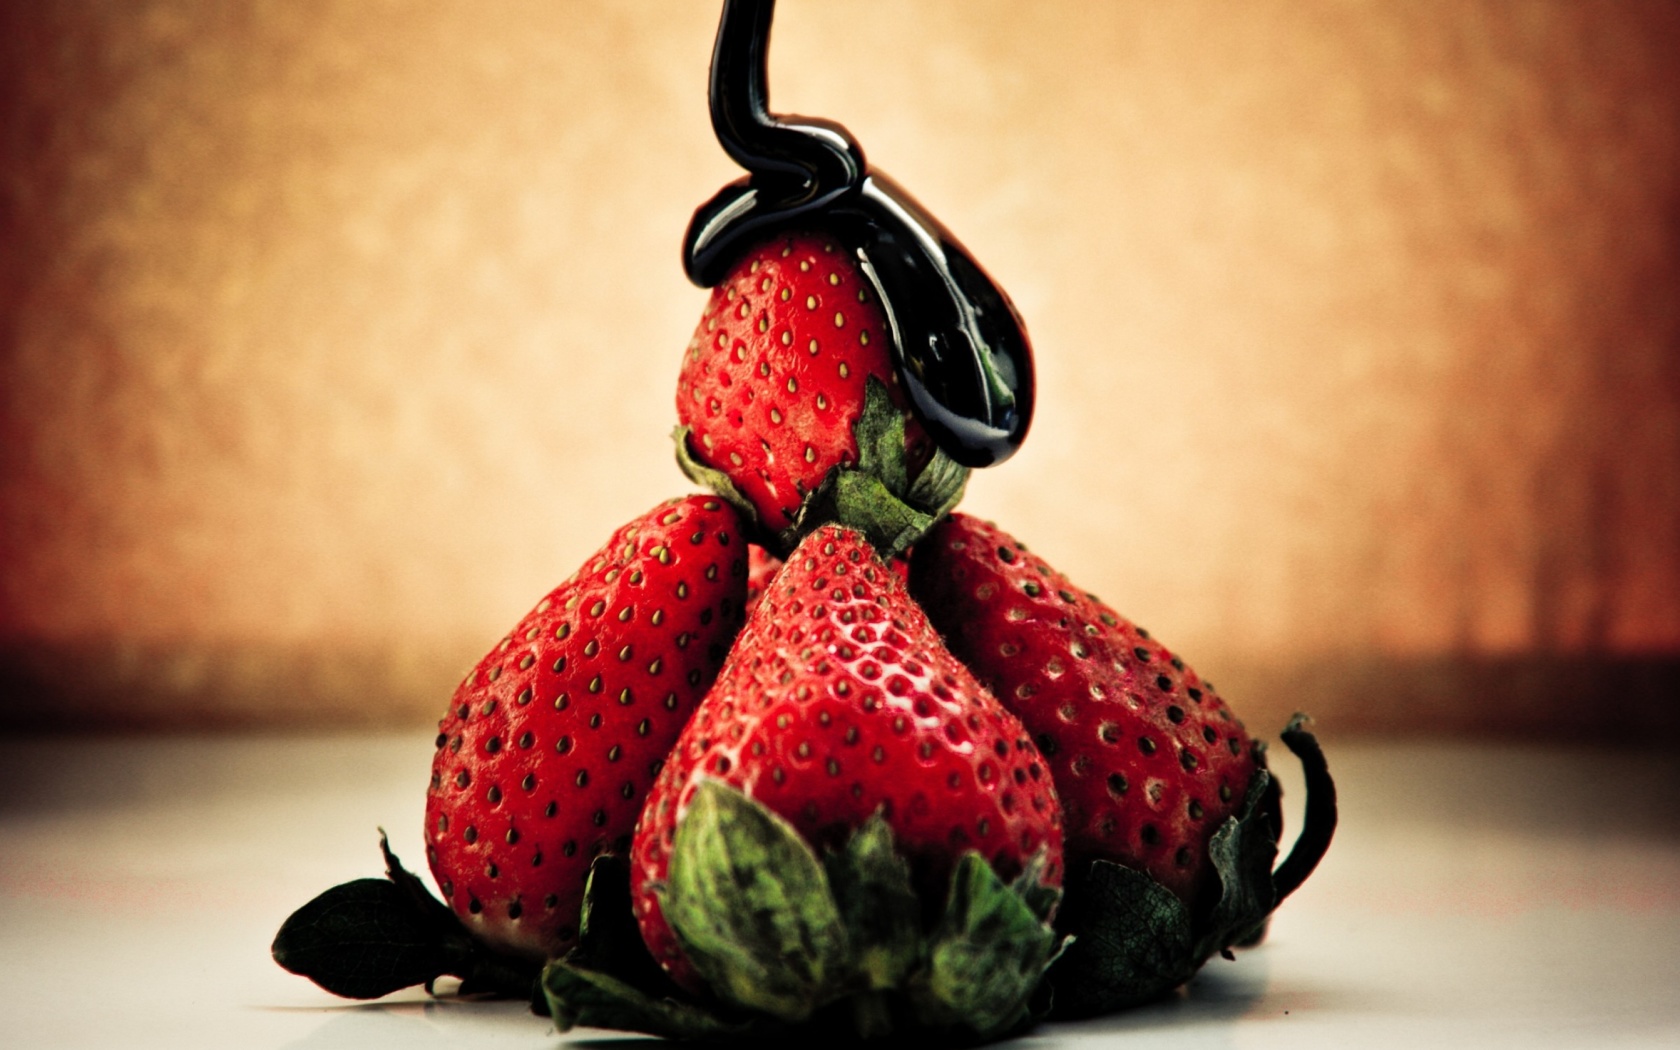 Strawberries with chocolate wallpaper 1680x1050